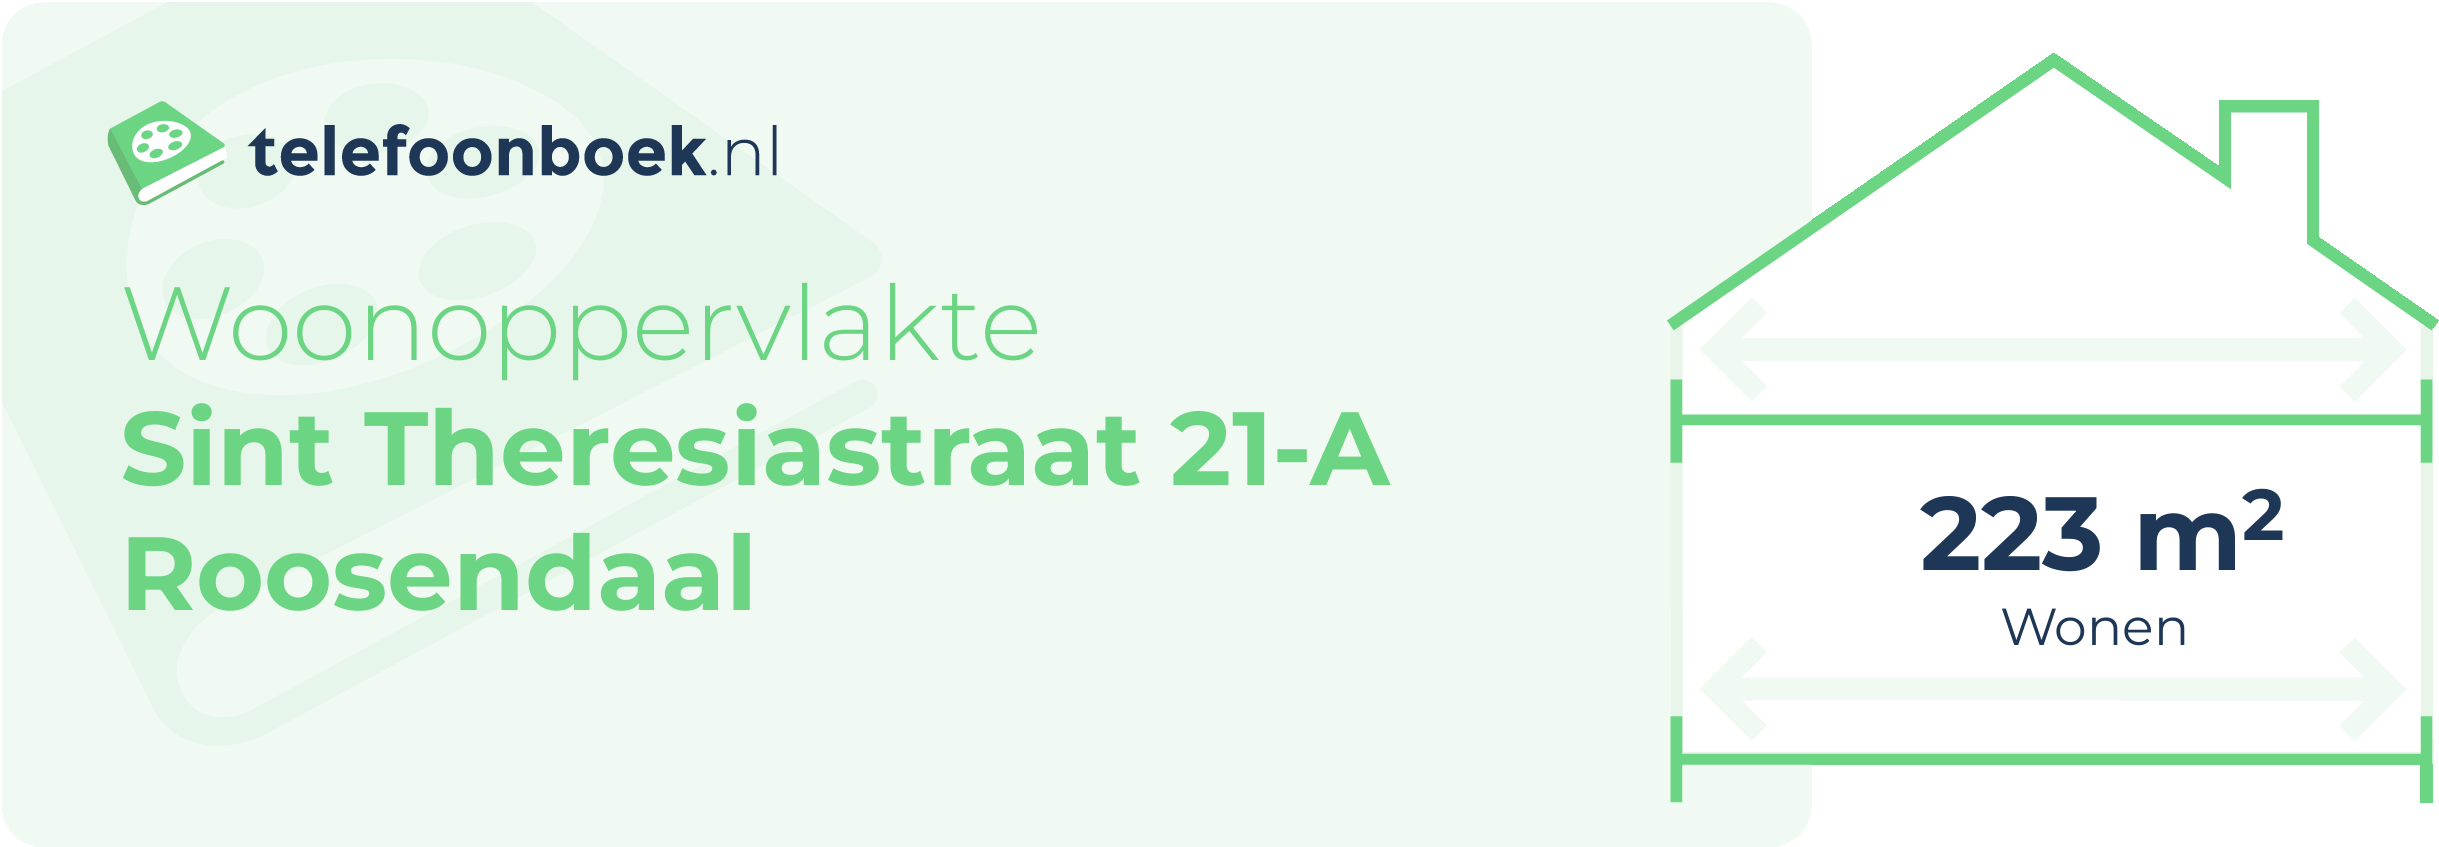 Woonoppervlakte Sint Theresiastraat 21-A Roosendaal